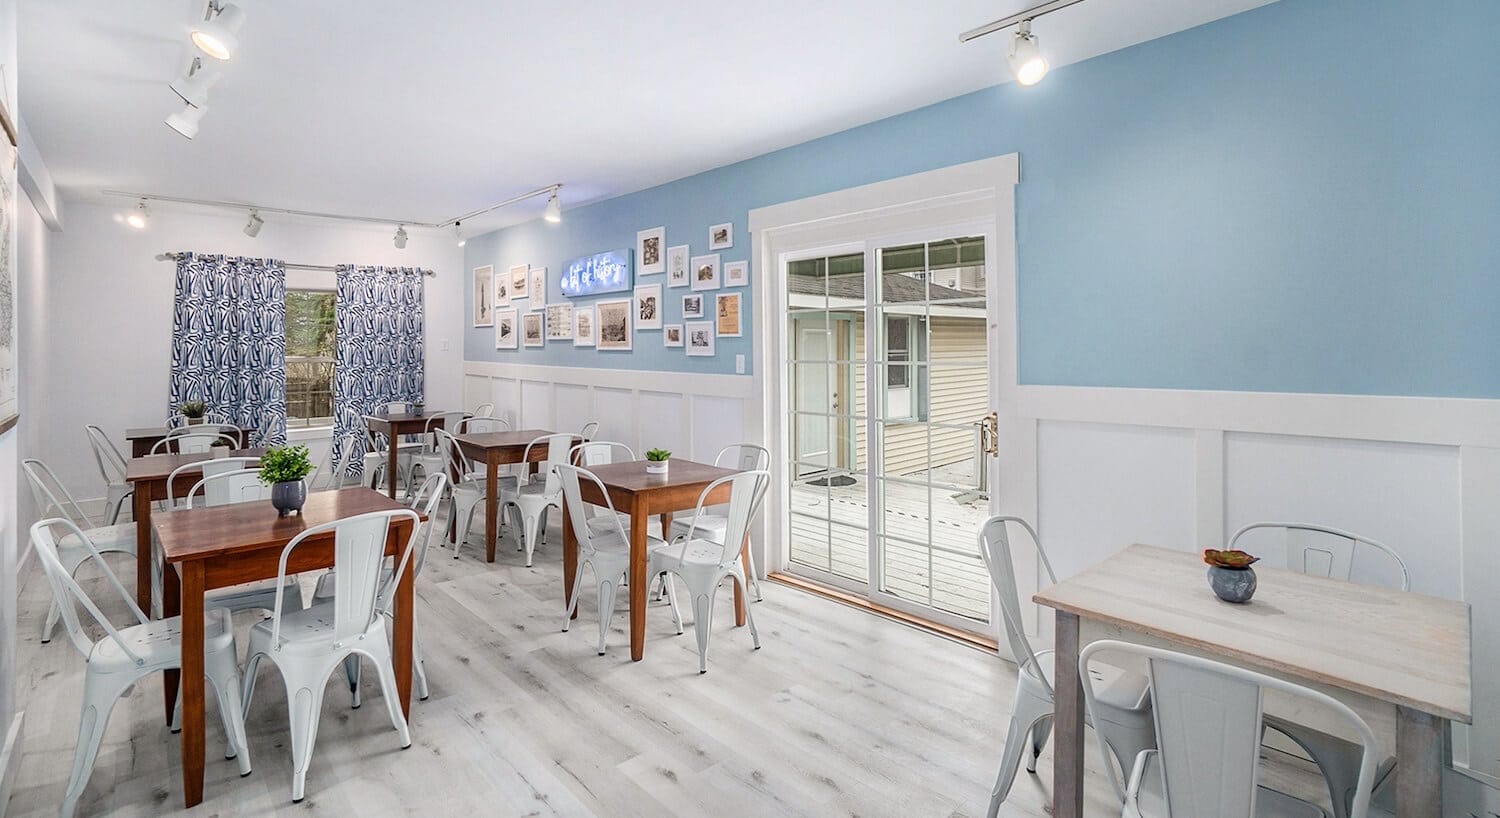 A dining room with pale blue walls, white wainscotting, wood floors, and several wood tables and metal chairs throughout the room.